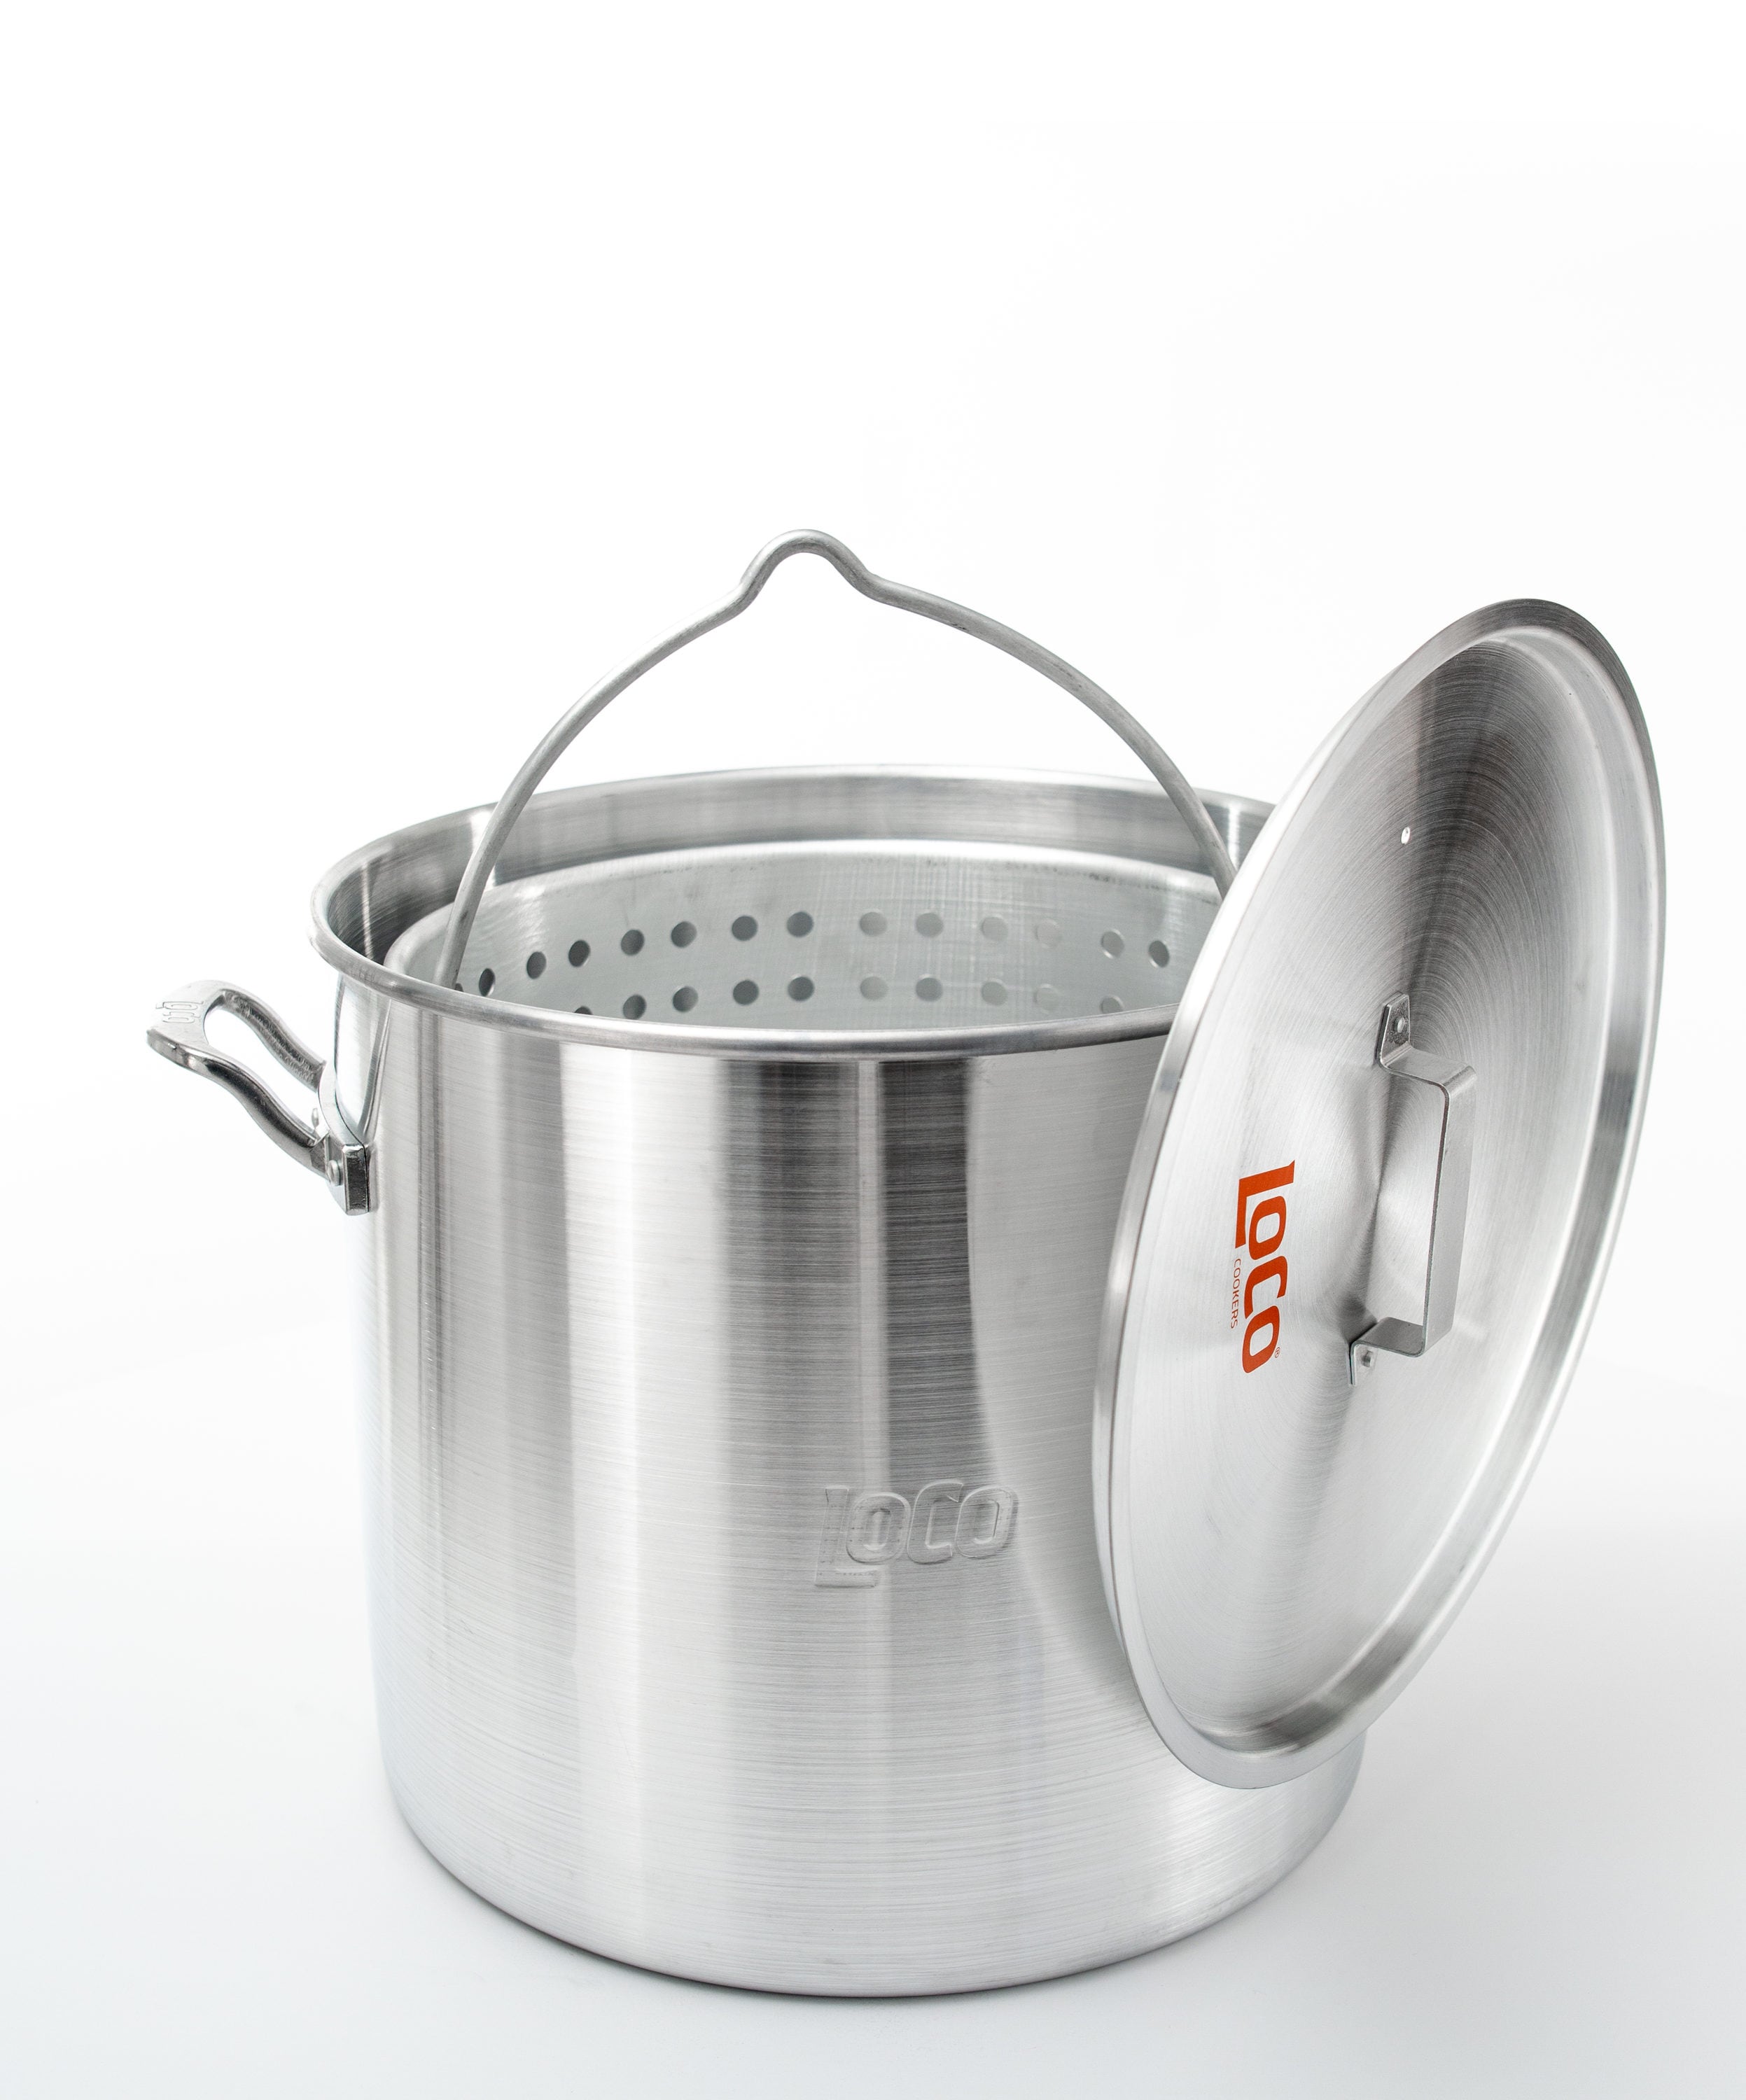 s Included Basket LoCo COOKERS 30-Quart Aluminum Stock Pot Lid s Included 